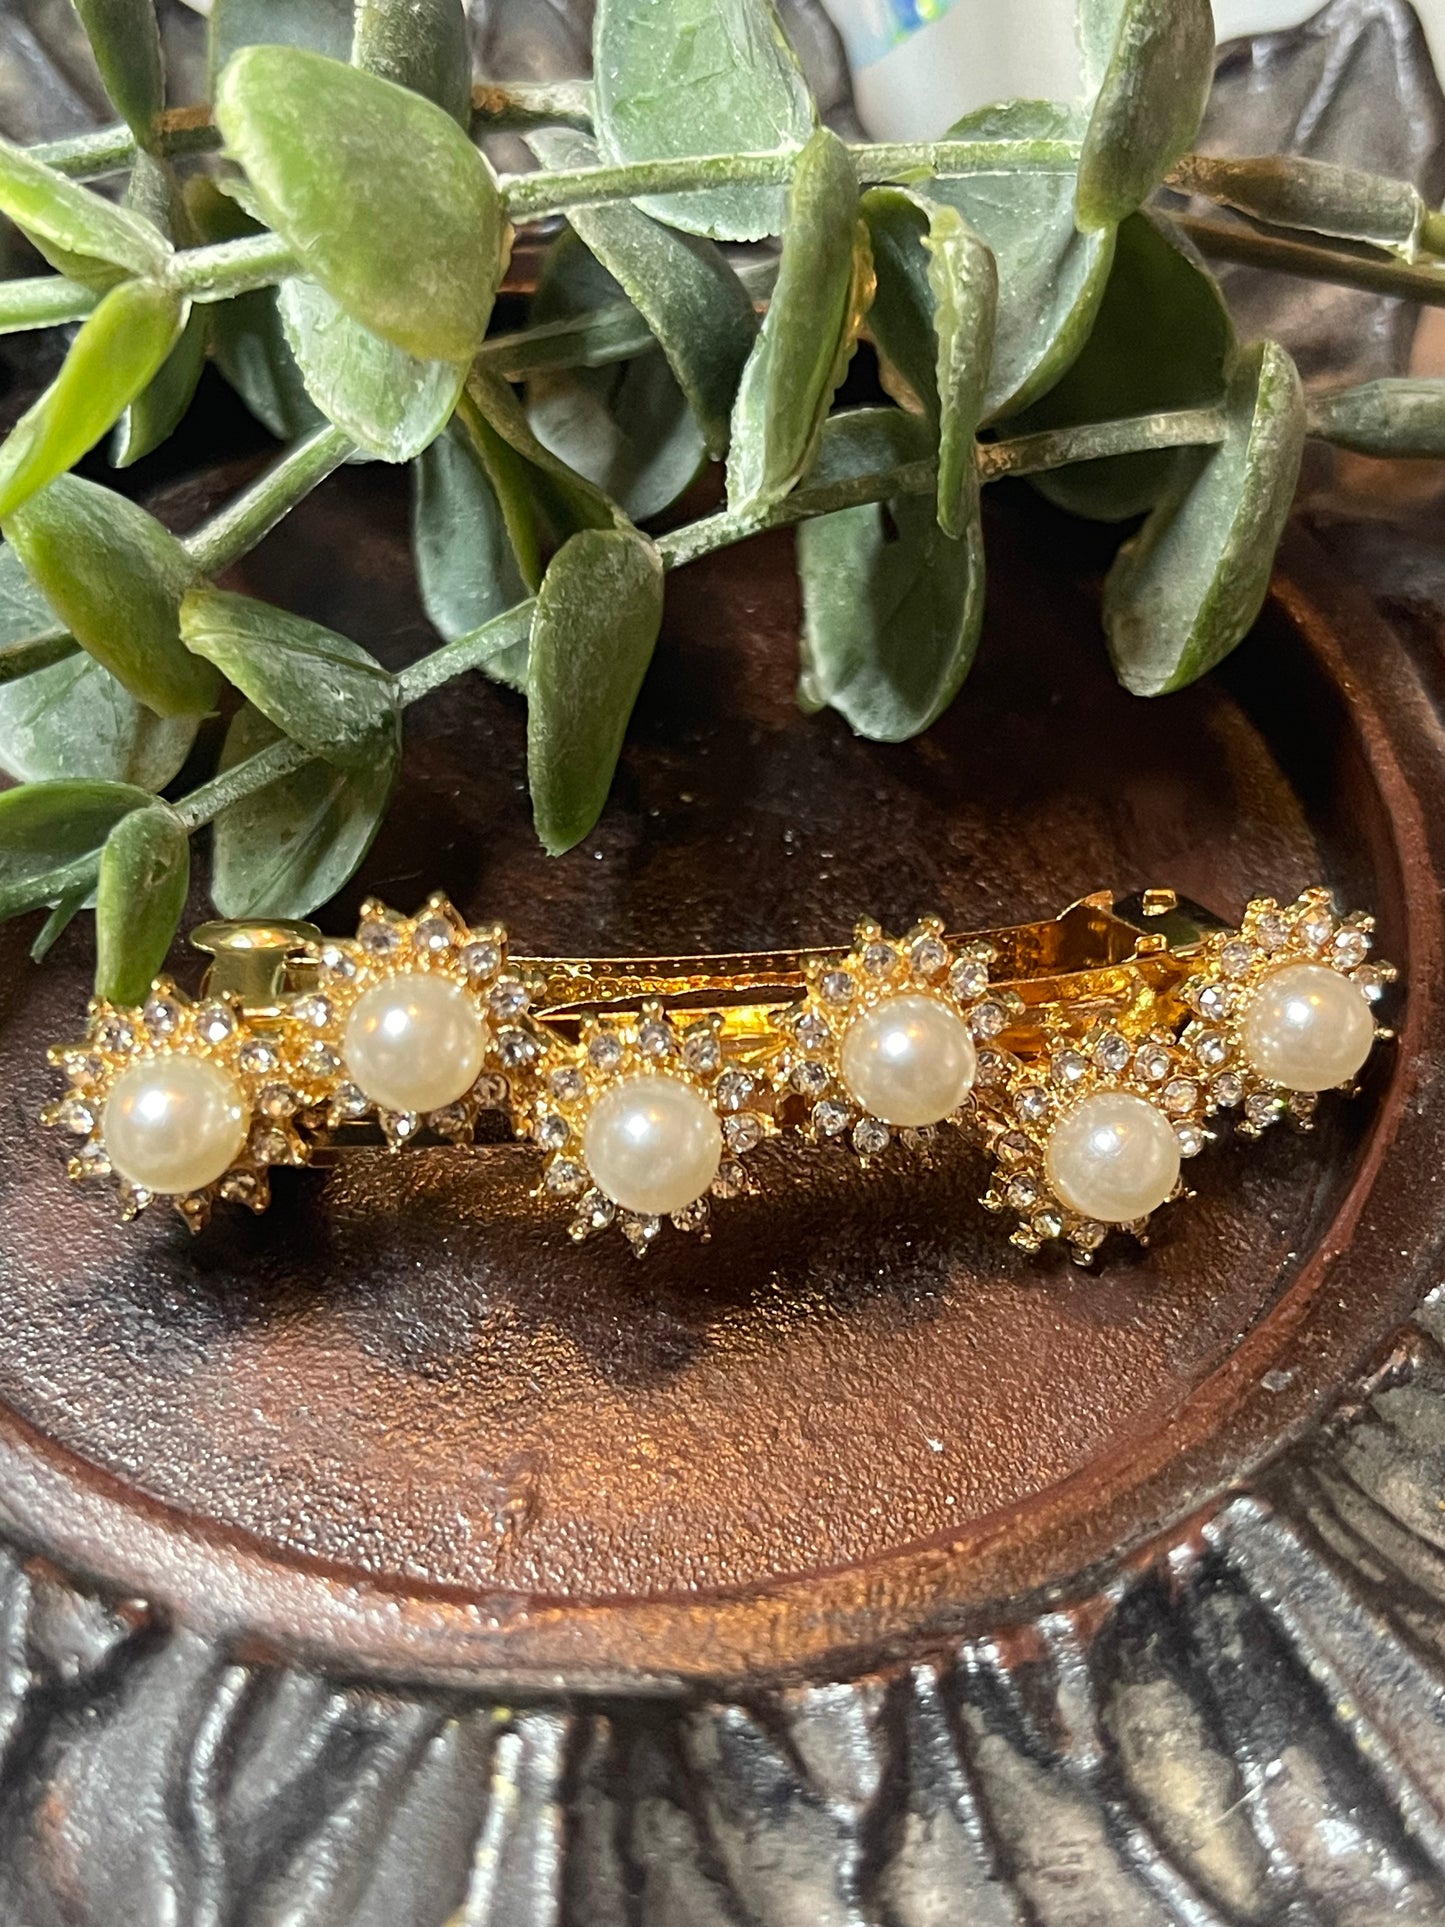 White faux Pearl Crystal rhinestone barrette approximately 2.75” gold tone formal hair accessories gift wedding bridesmaid prom birthday mother of bride groom